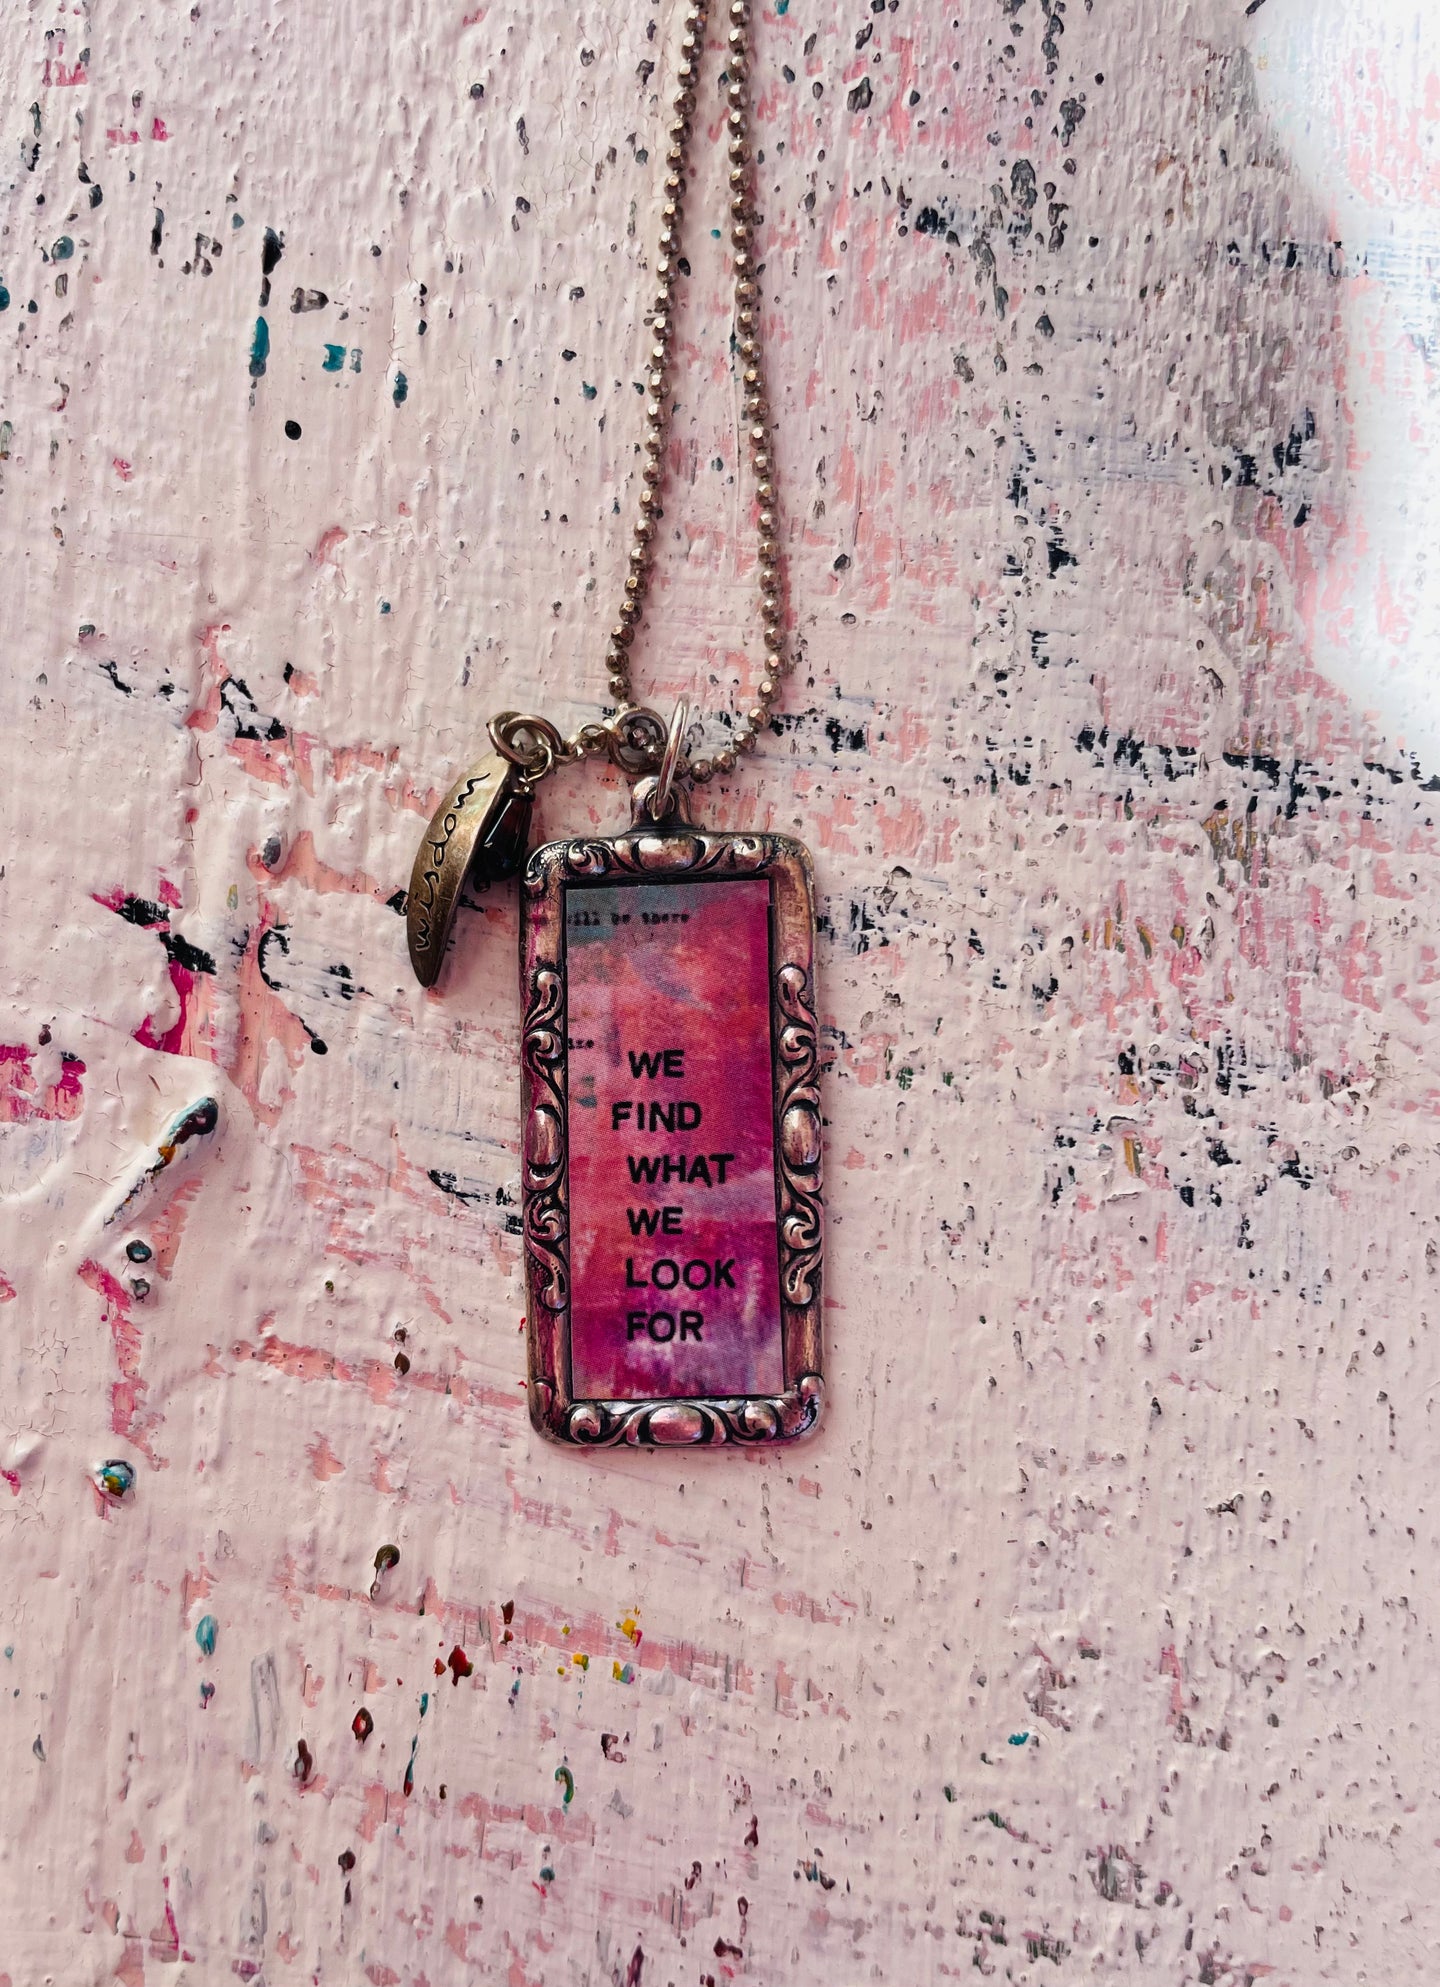 Upcycled and hand painted necklace